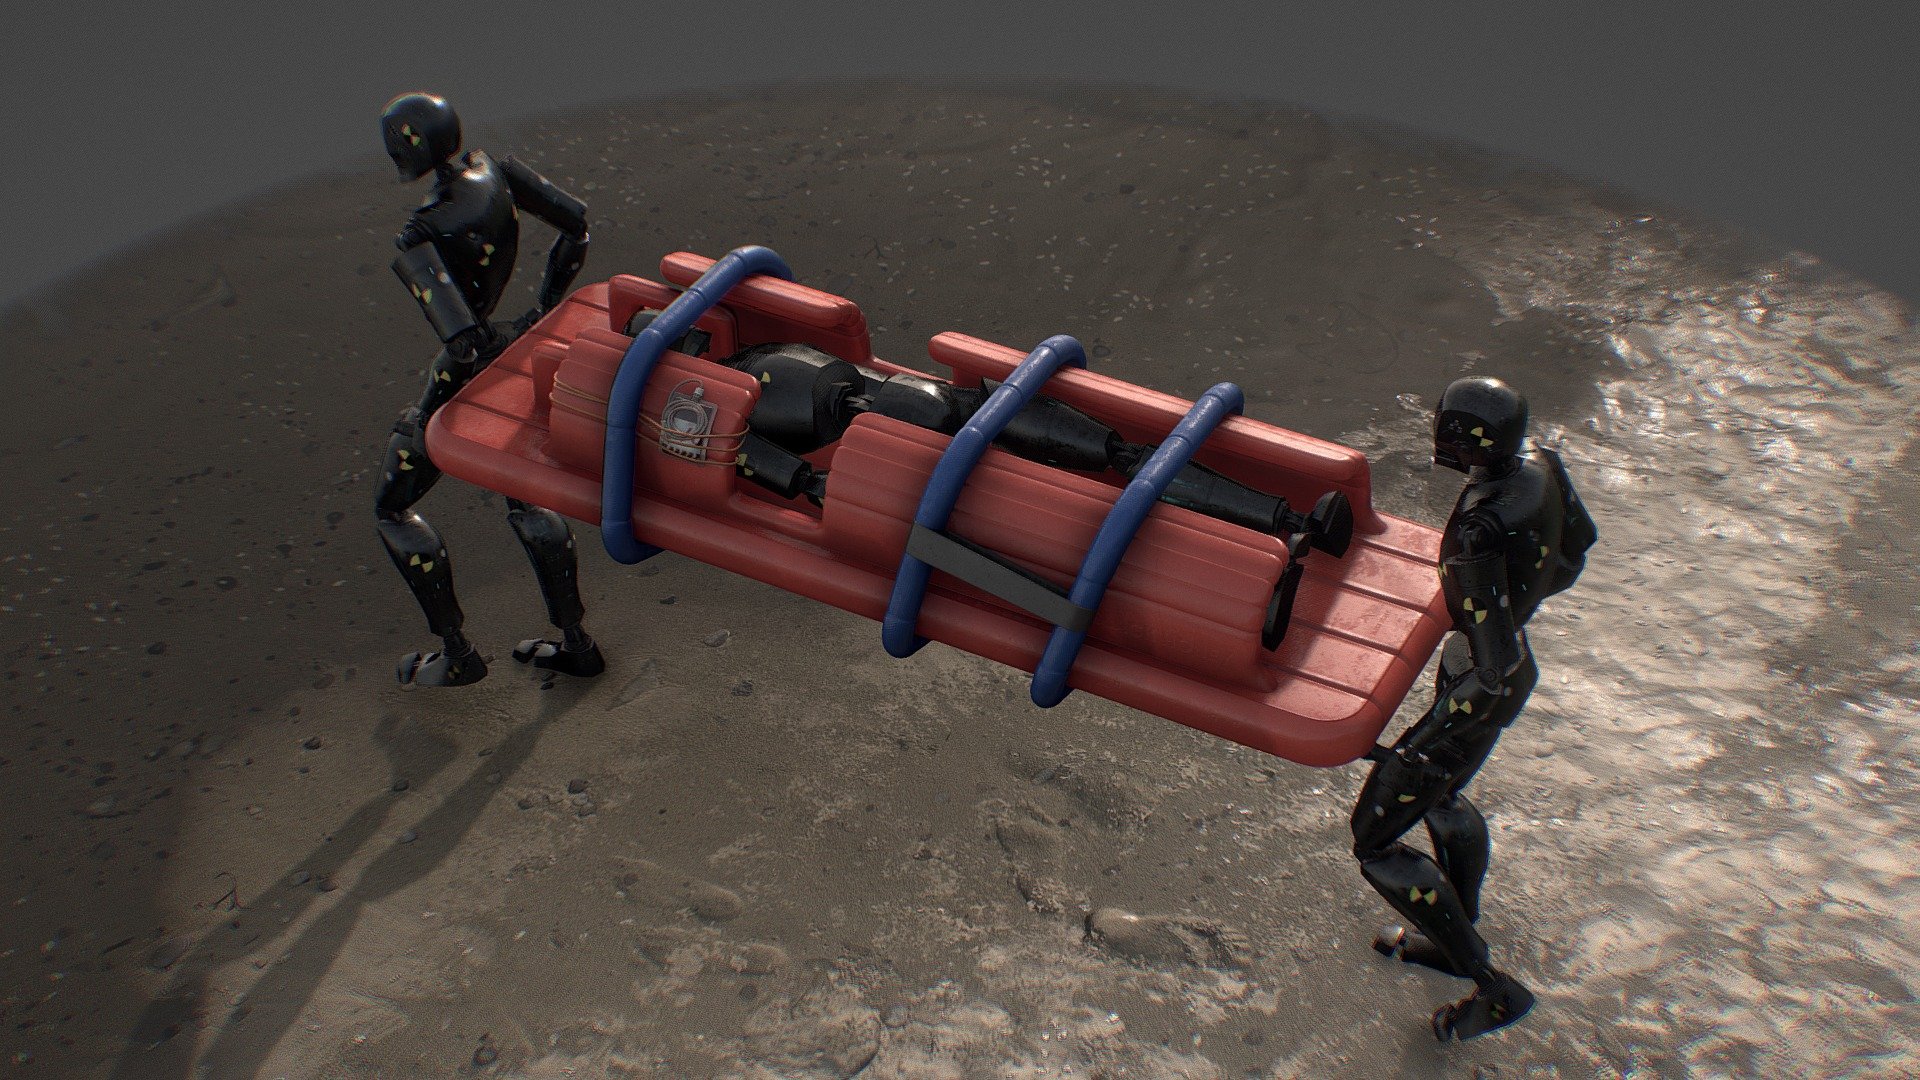 Covert Operation Version
https://sketchfab.com/3d-models/covert-operation-emergency-stretcher-42d7c1b6fba54aca933ee33198bb30f5

Drag and Drop and you are good to go. 4k Textures.

Check my profile for free models https://sketchfab.com/re1monsen If you enjoy my work please consider supporting me I have many affordable models in the shop. Smash that follow!

Feel free to contact me. I’d love yo hear from you.

Thanks! - Emergency Stretcher - Download Free 3D model by re1monsen 3d model